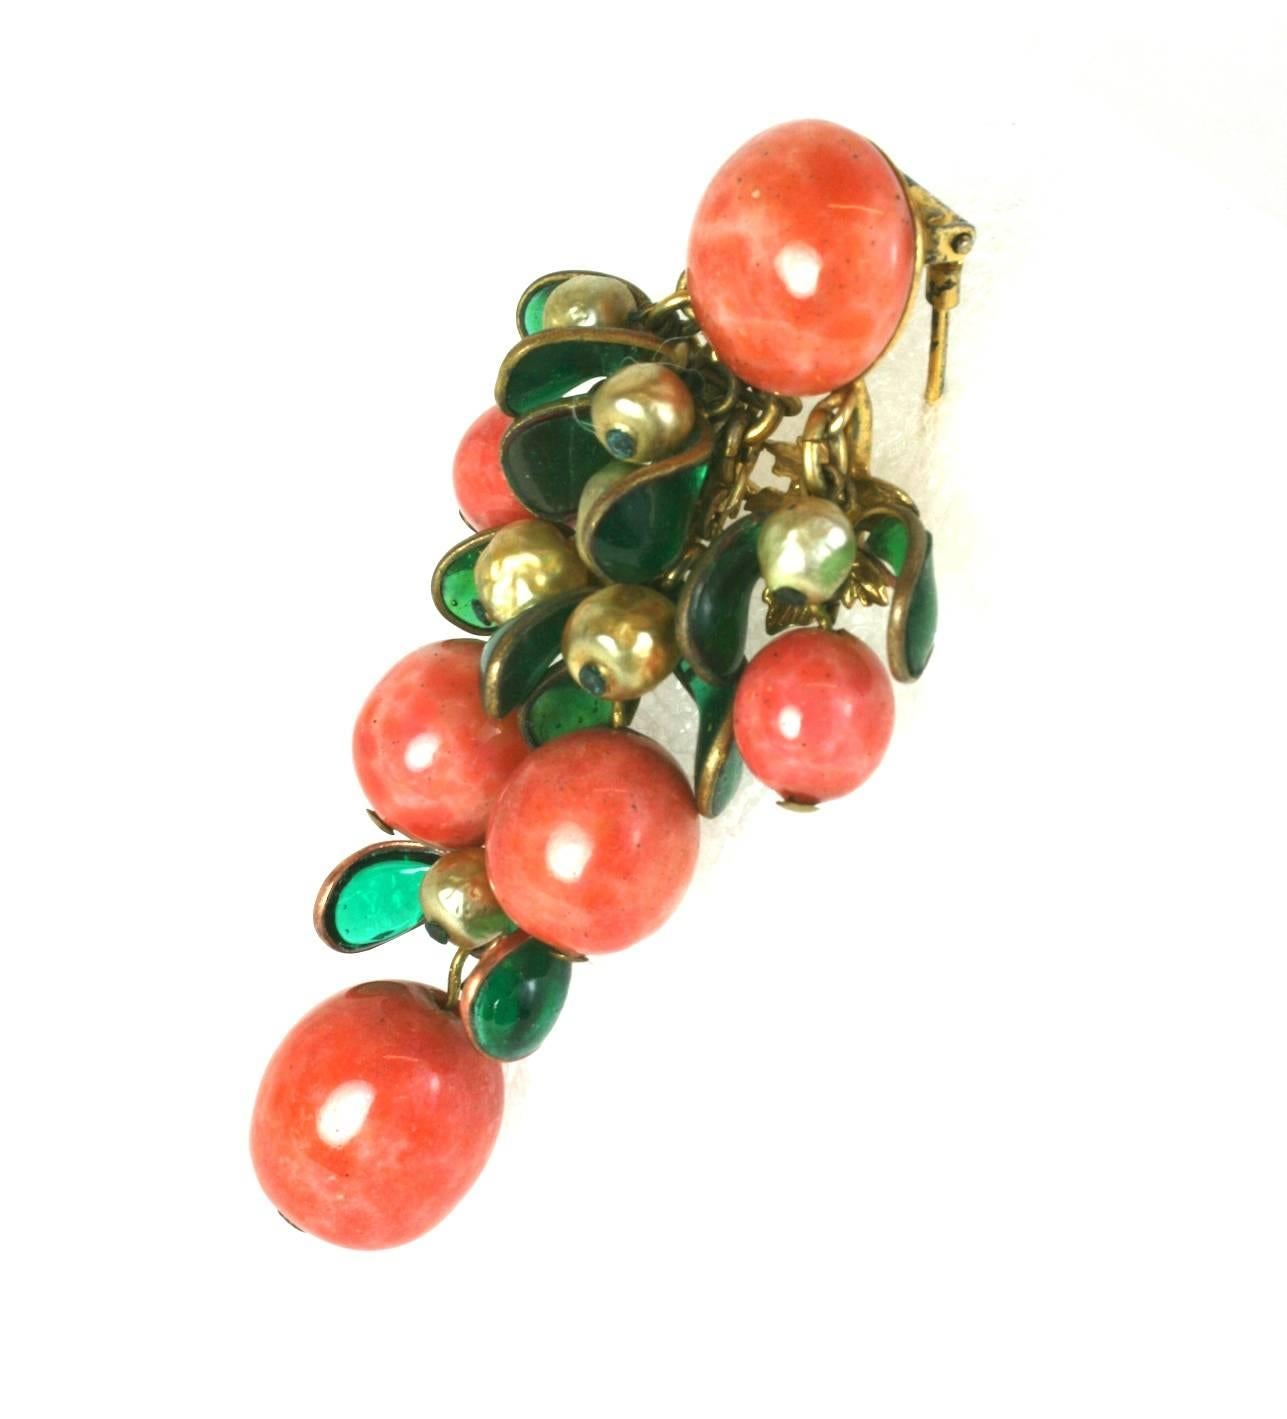 Nettie Rosenstein Pate De Verre Clip made in the 1930's. Many of costume jewelry houses imported 